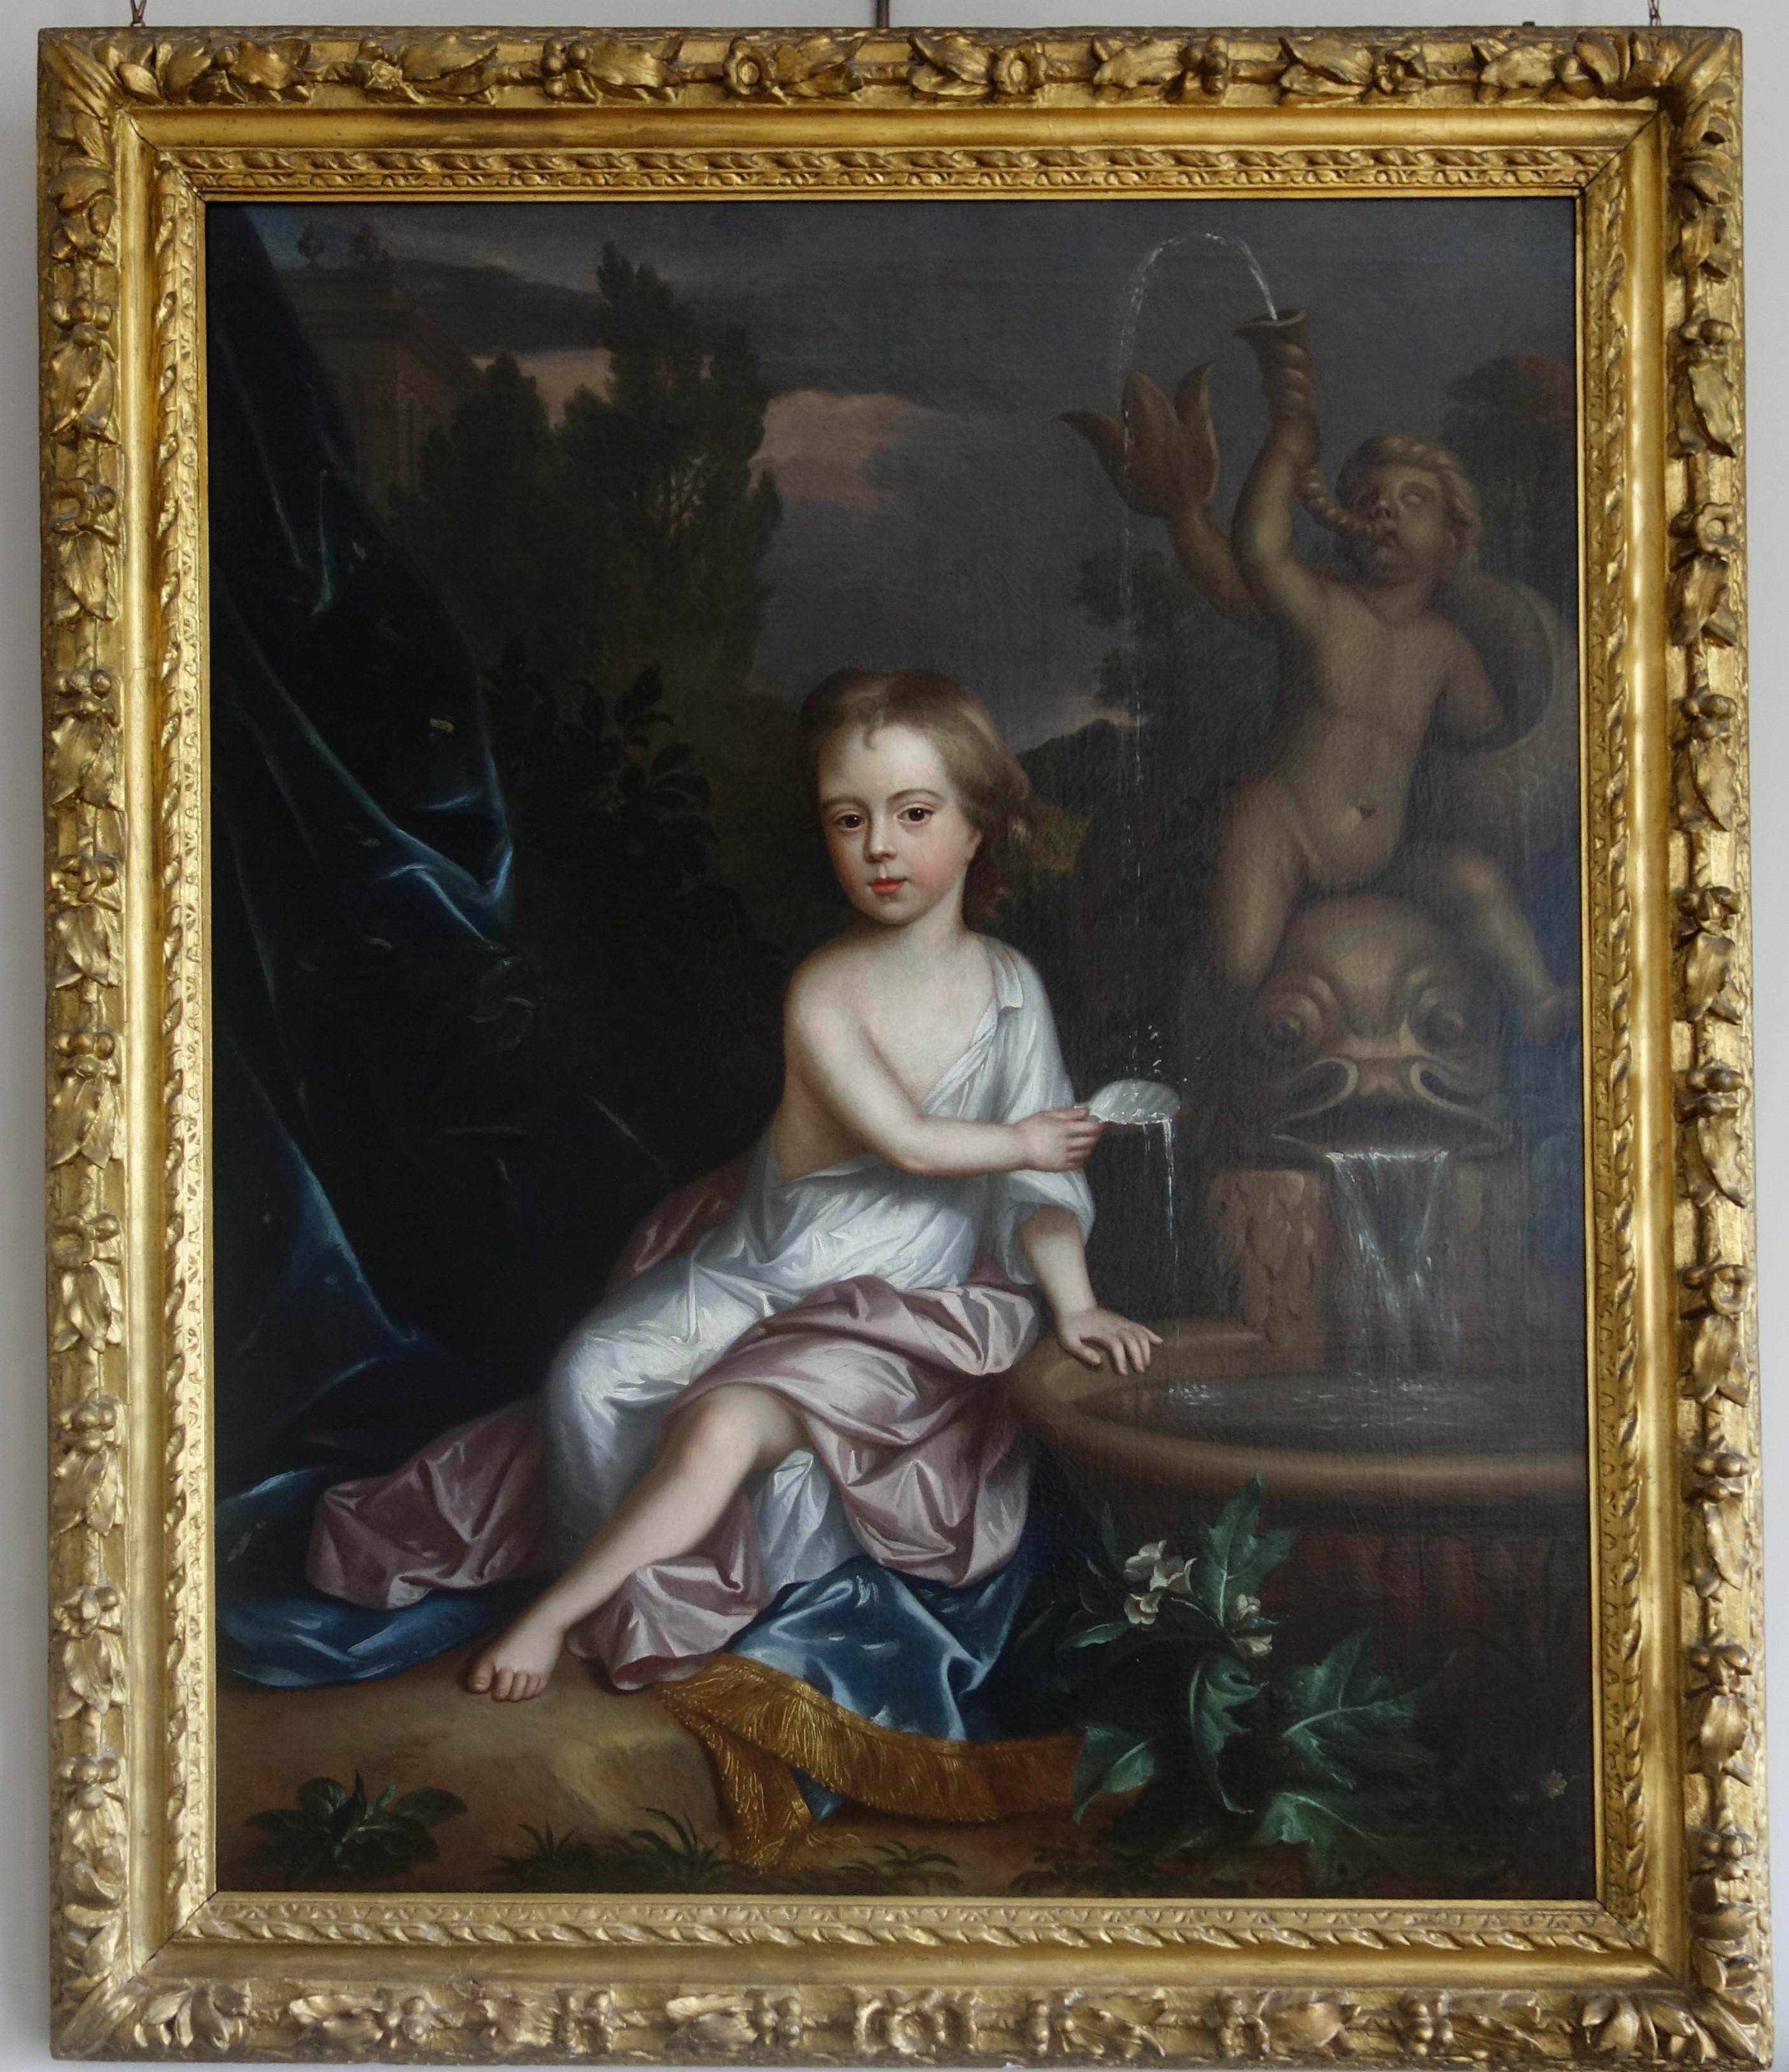 English 17th century portrait of James Thynne as a young boy by a fountain